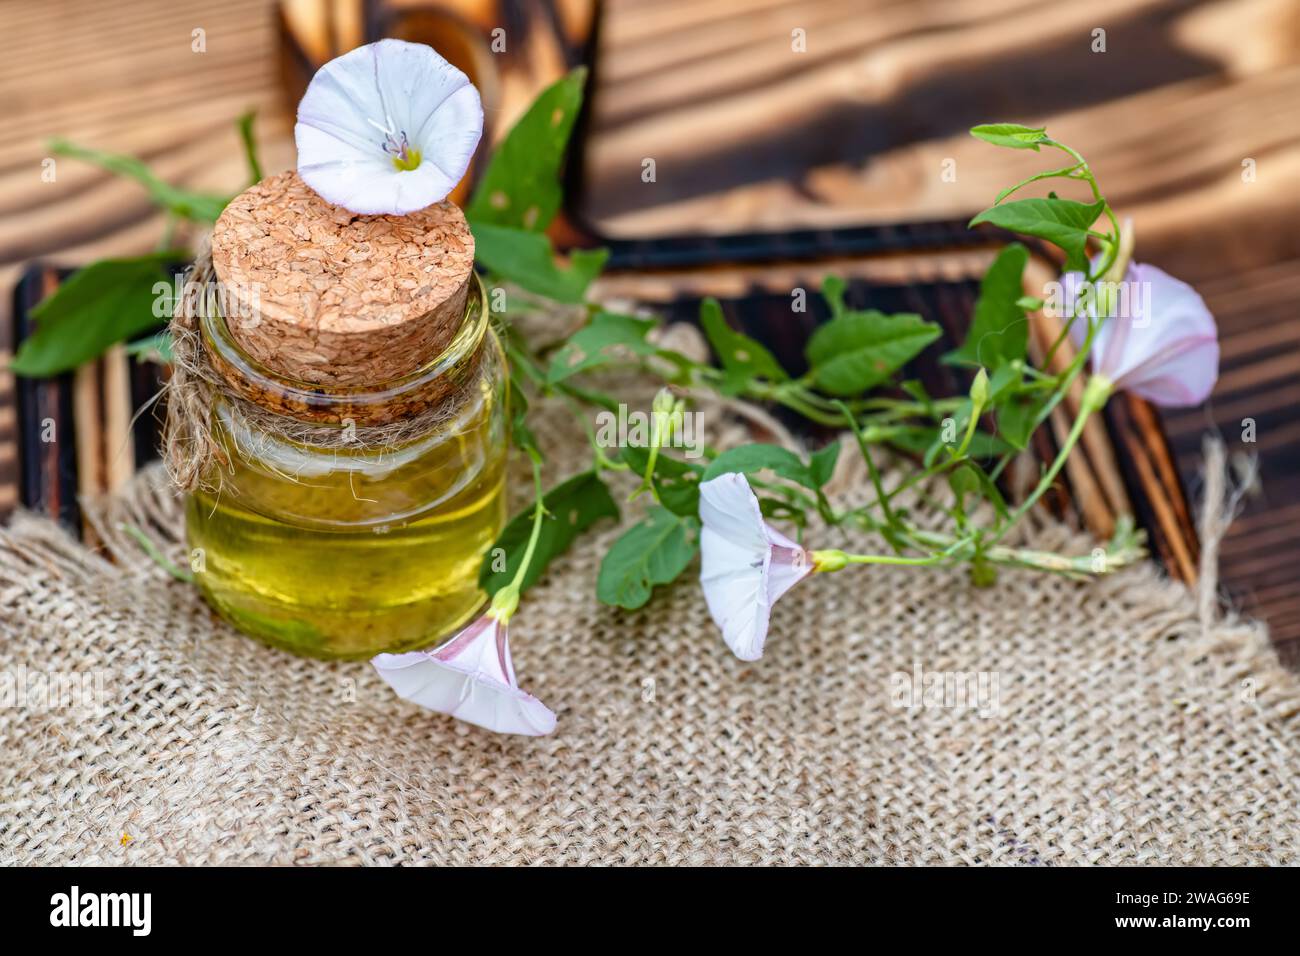 Convolvulus arvensis, or field bindweed near a medicine vial with a cork stopper with an elixir from an infusion of herbs Stock Photo